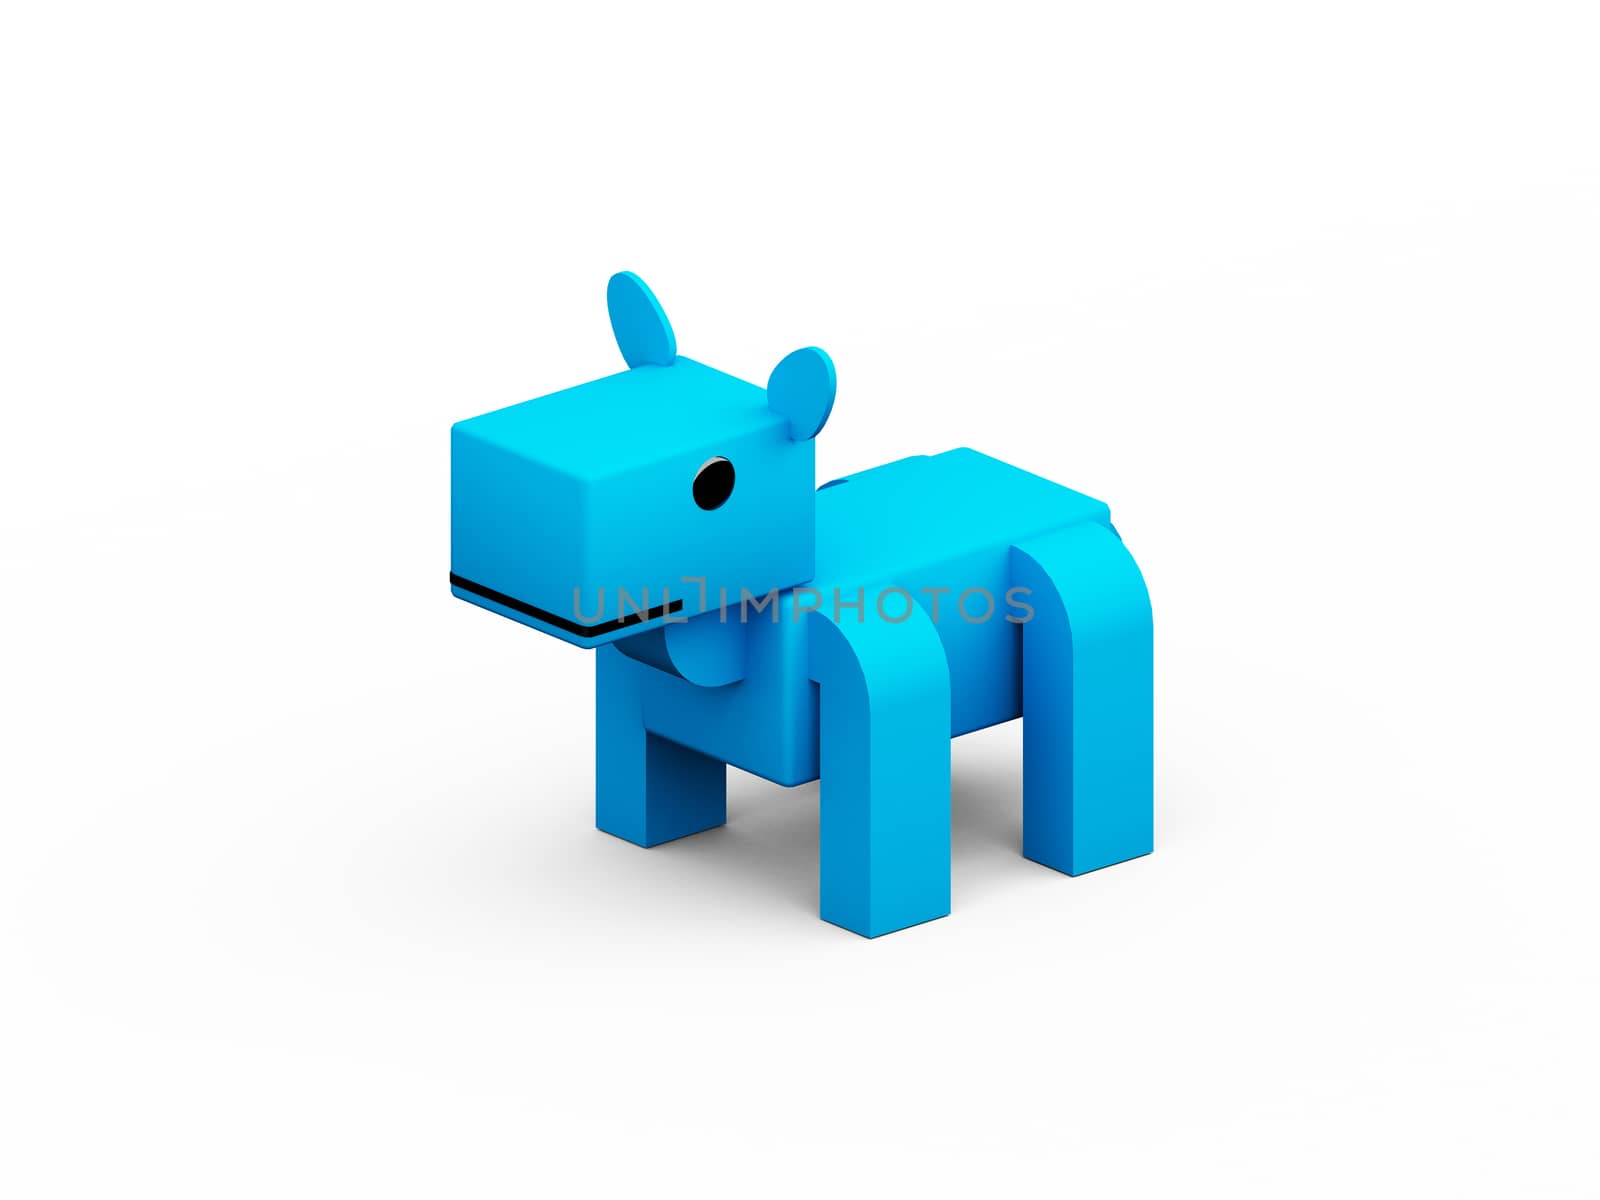 Horse 3d low polygon isolate on white background, concept